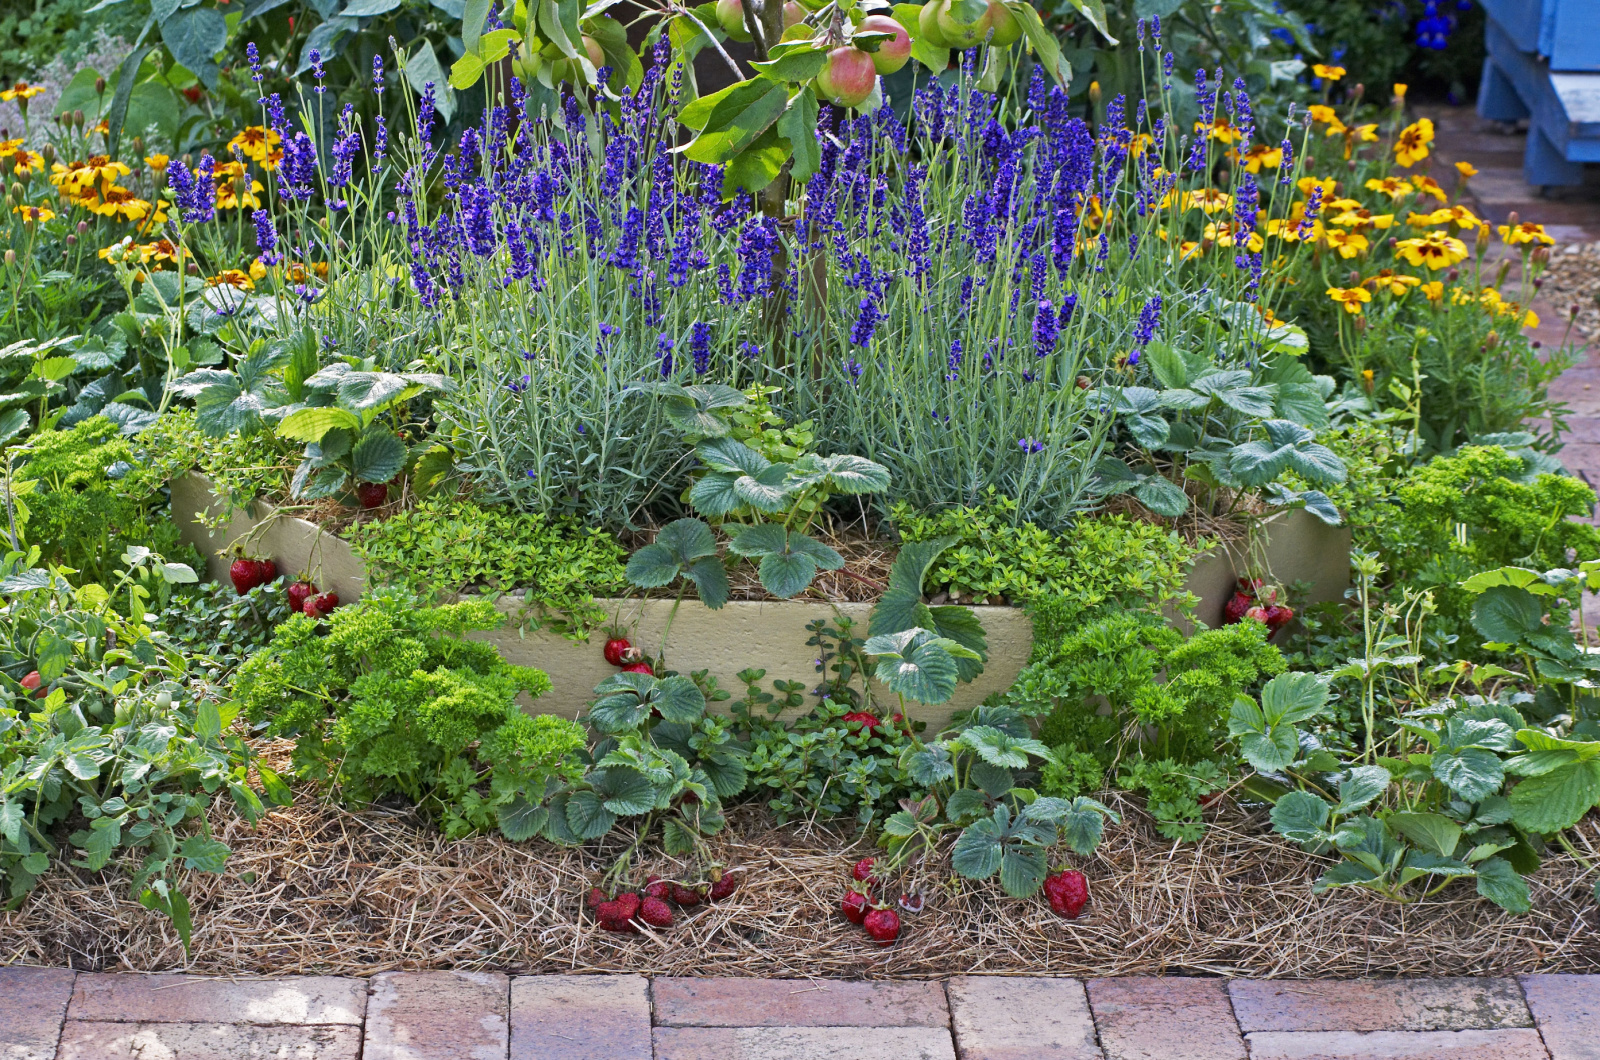 Strawberries, lavender and apples in a vegetable garden